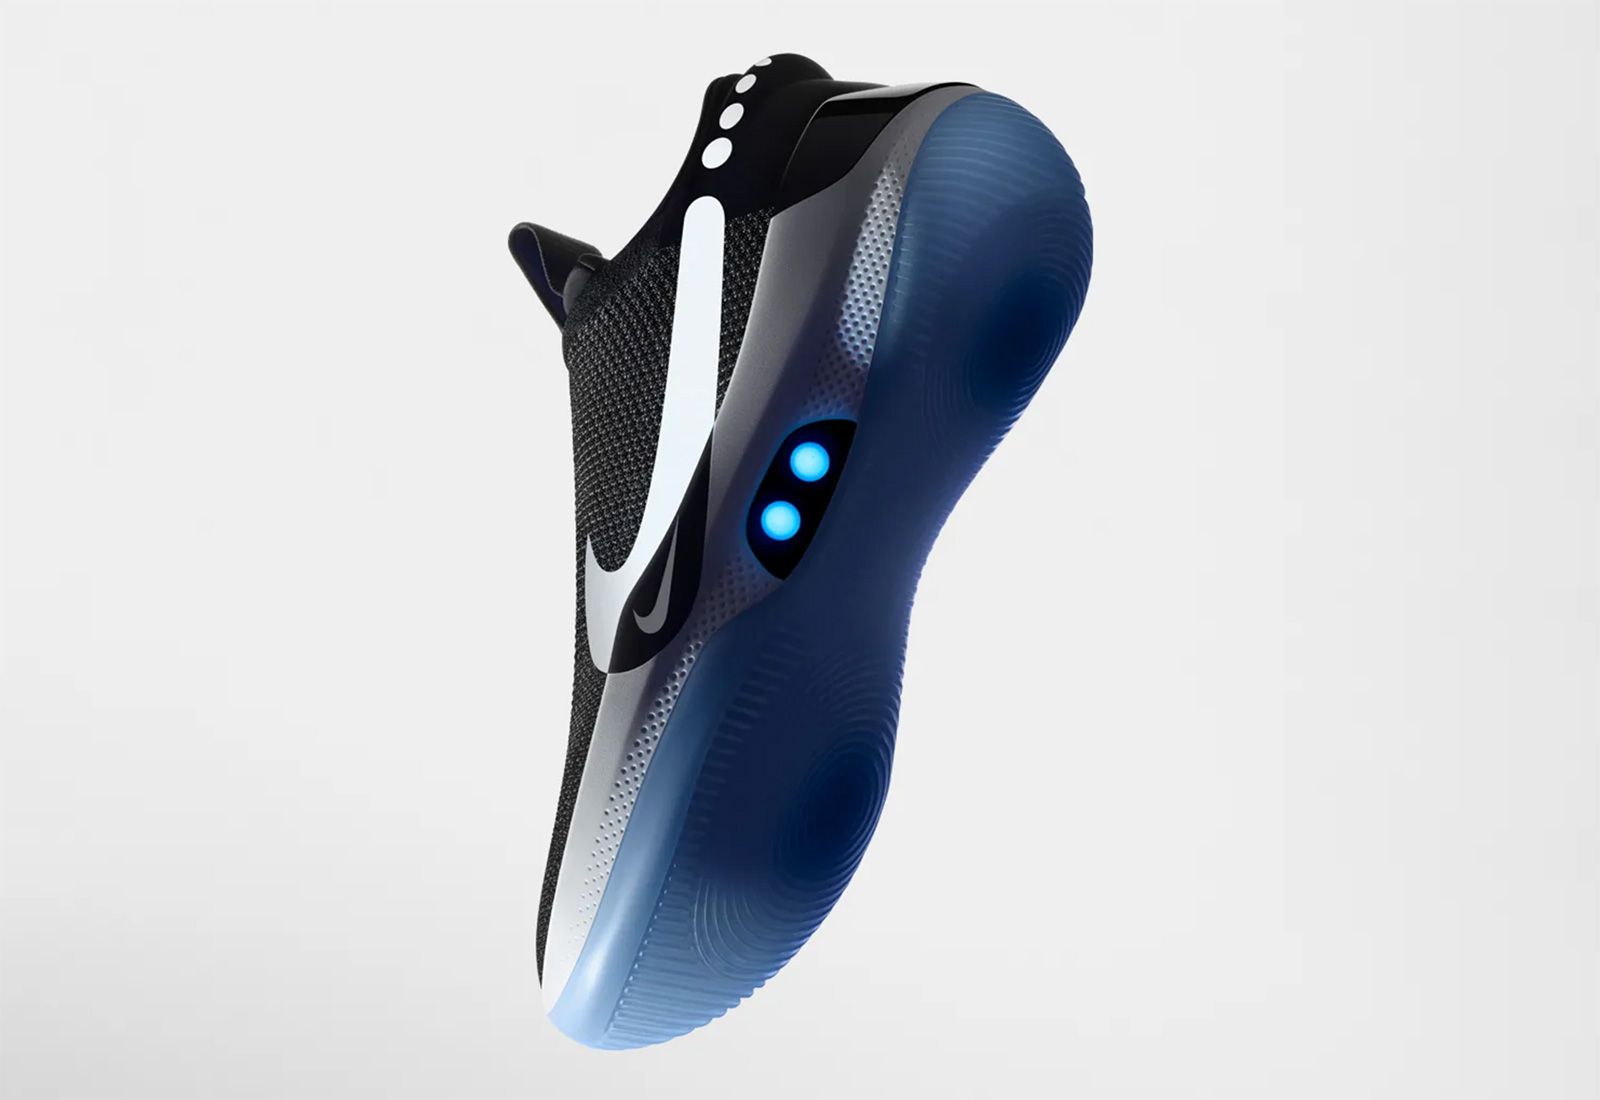 triángulo Cuyo Aumentar We Tested the Auto-Lacing Nike Adapt BB, and It's Worth $350